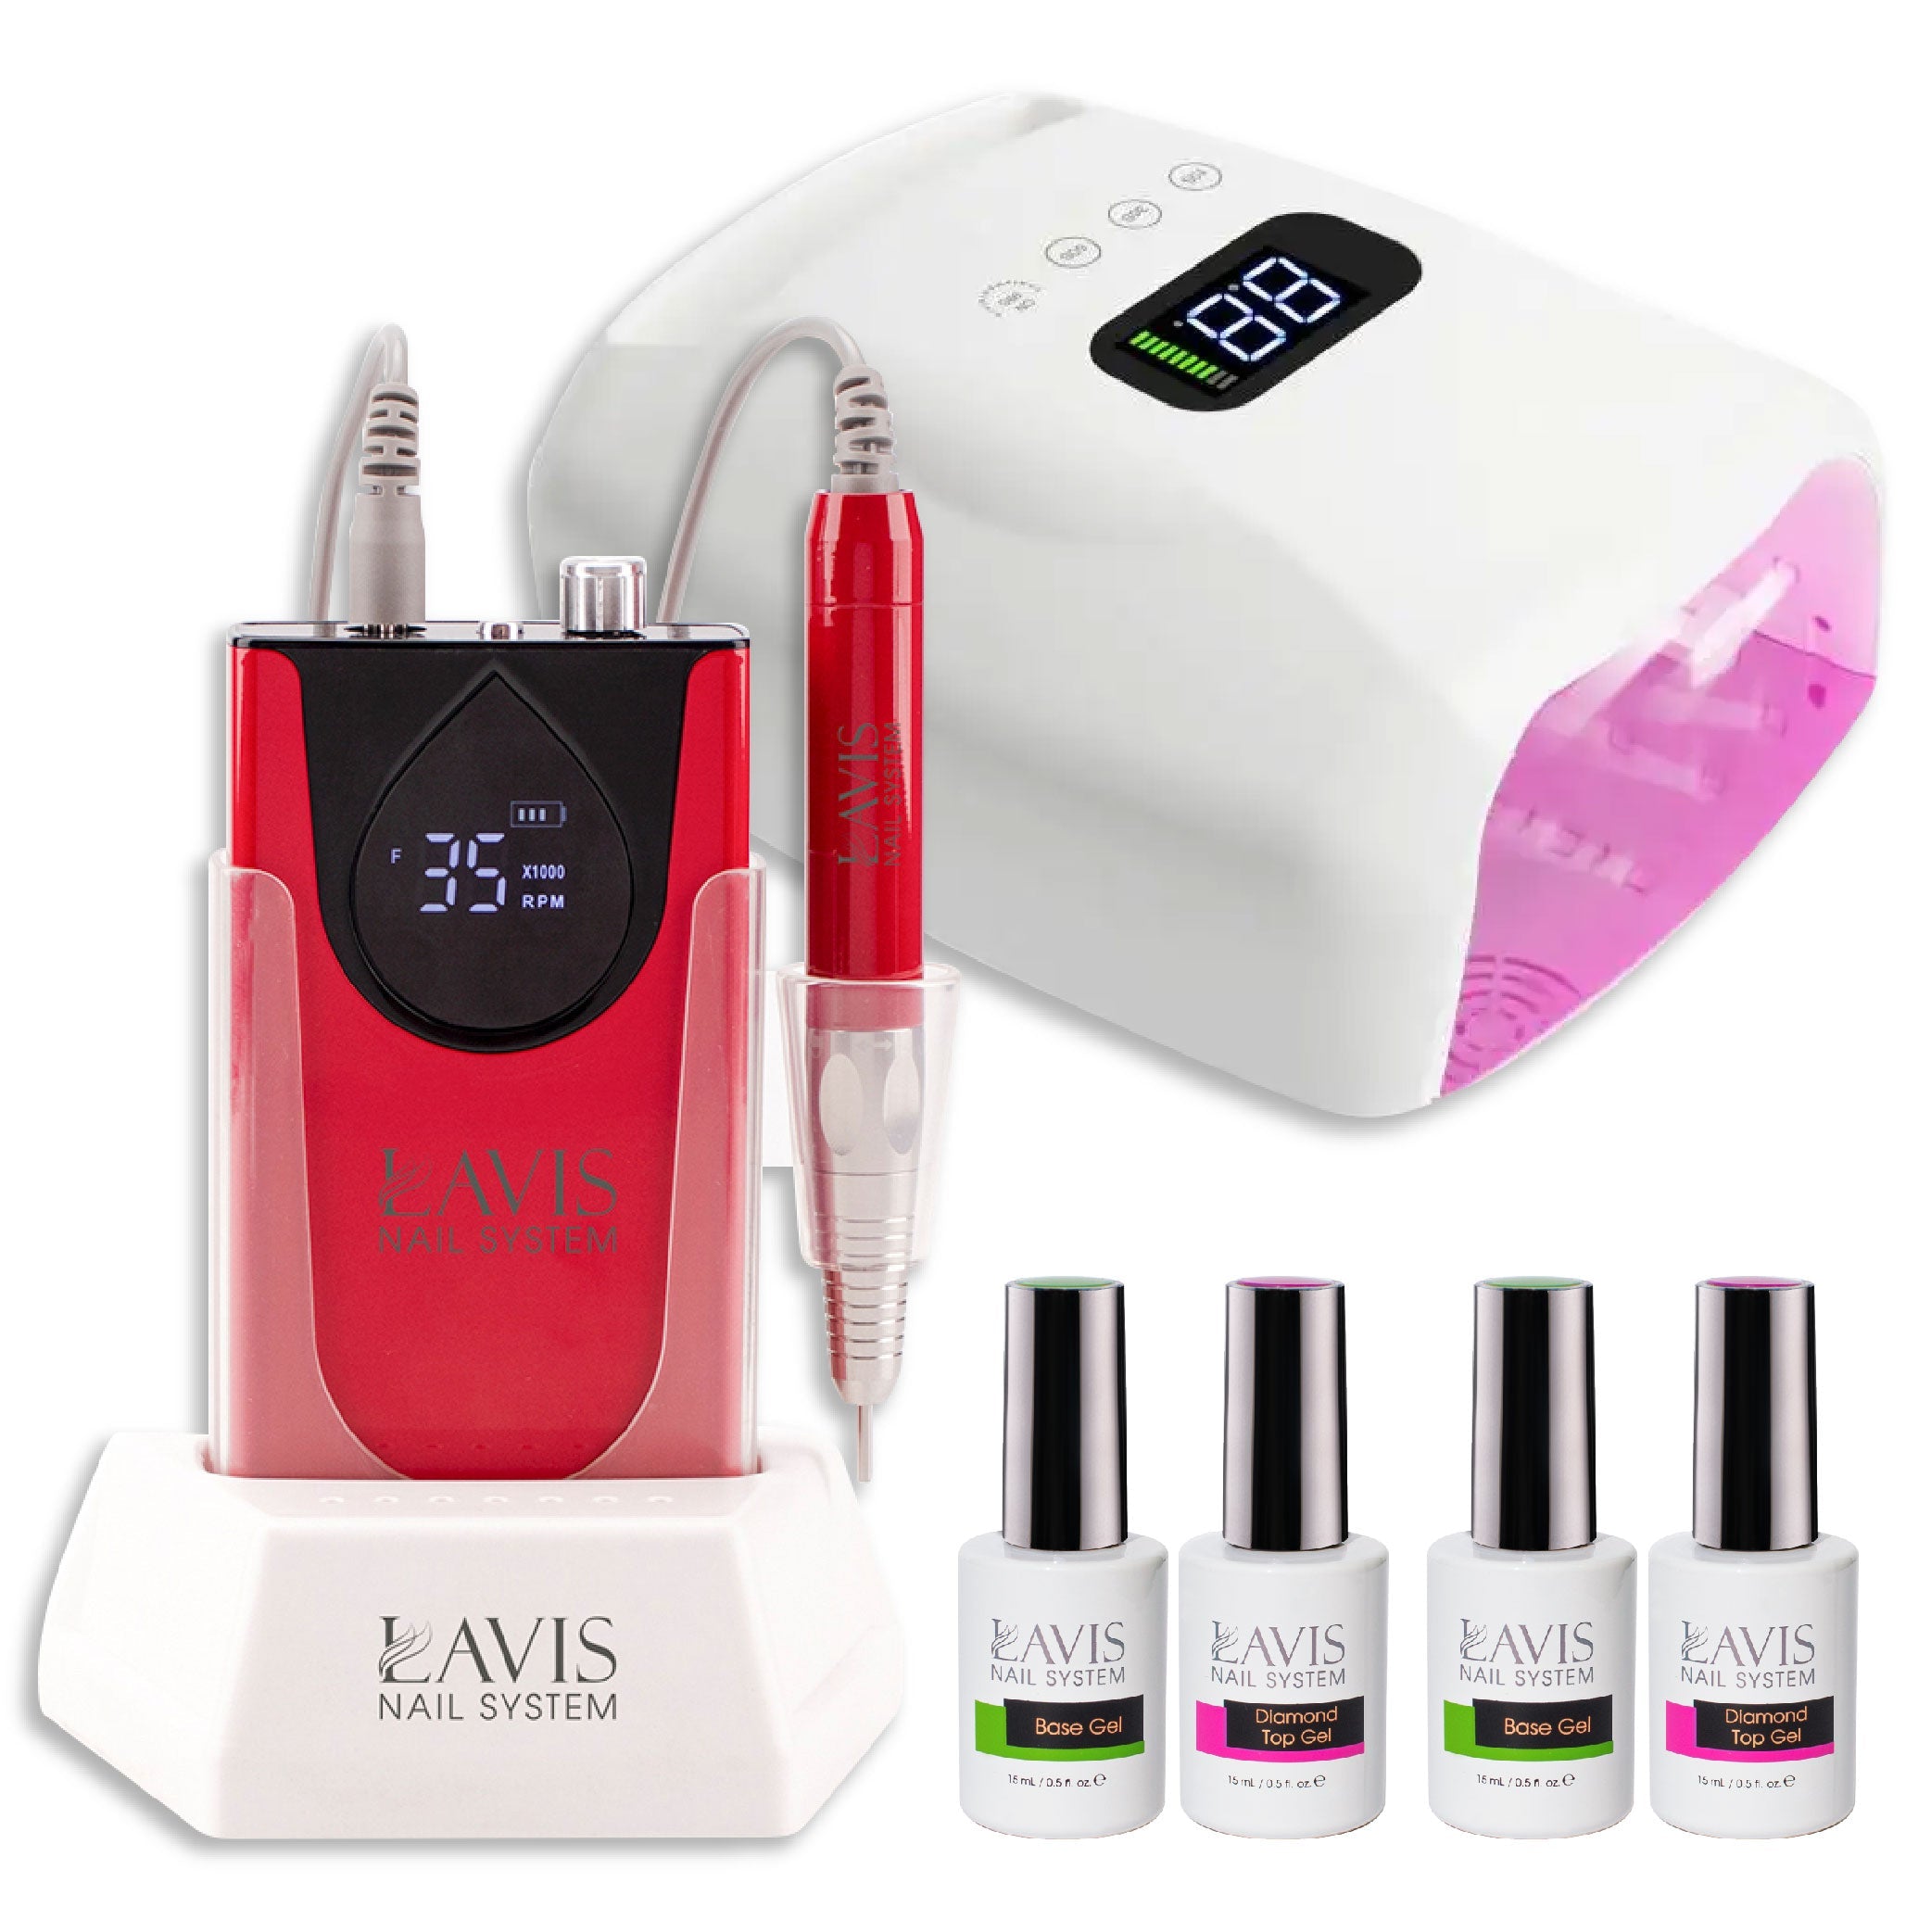 1 Lavis Nail Drill & 1 Lamp Rechargeable Cordless LED/UV Nail Lamps 96W - Red